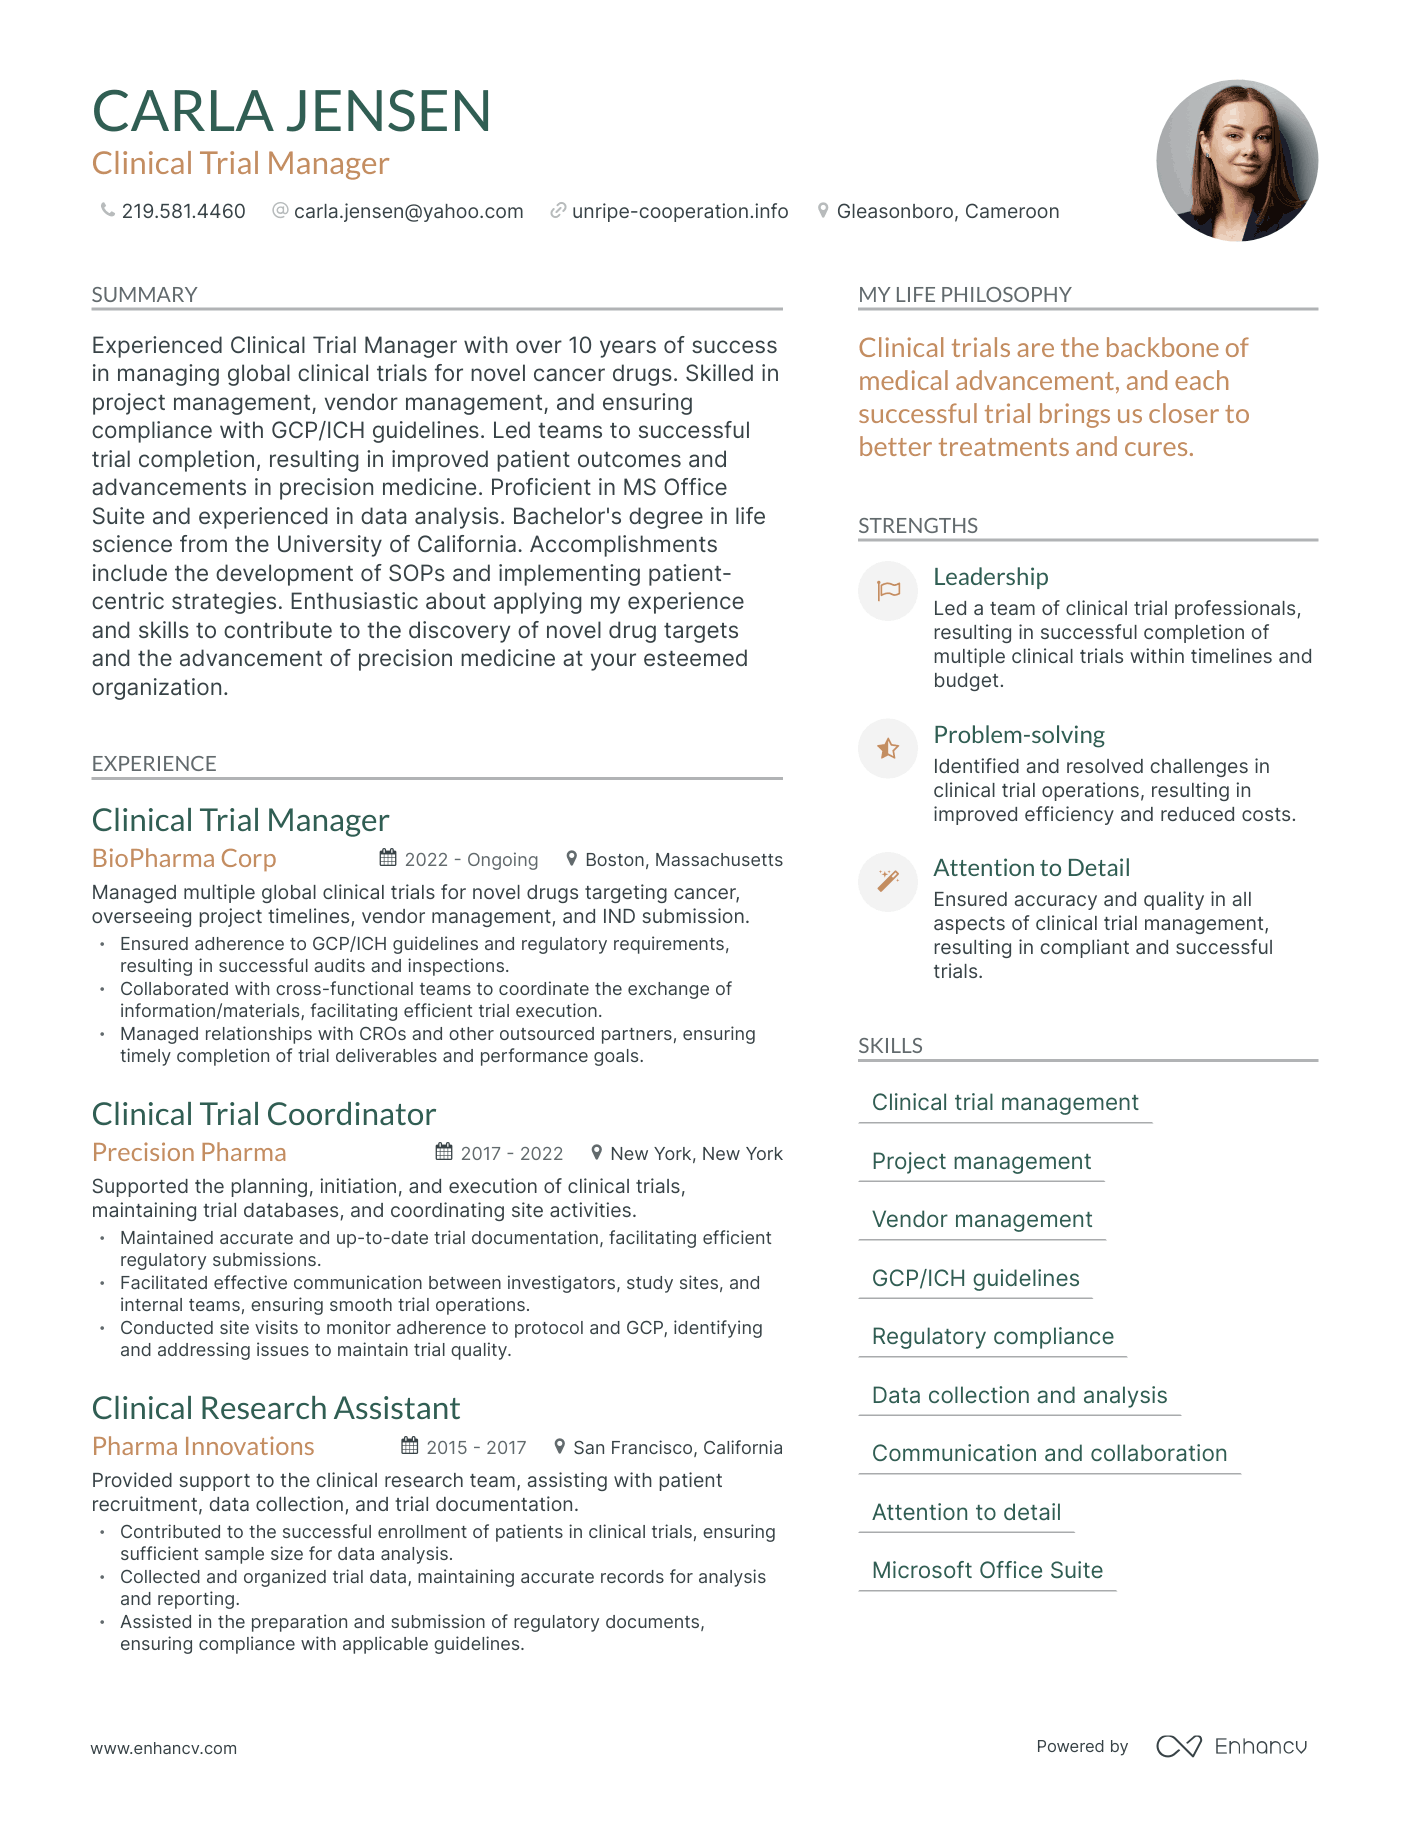 Clinical Trial Manager resume example